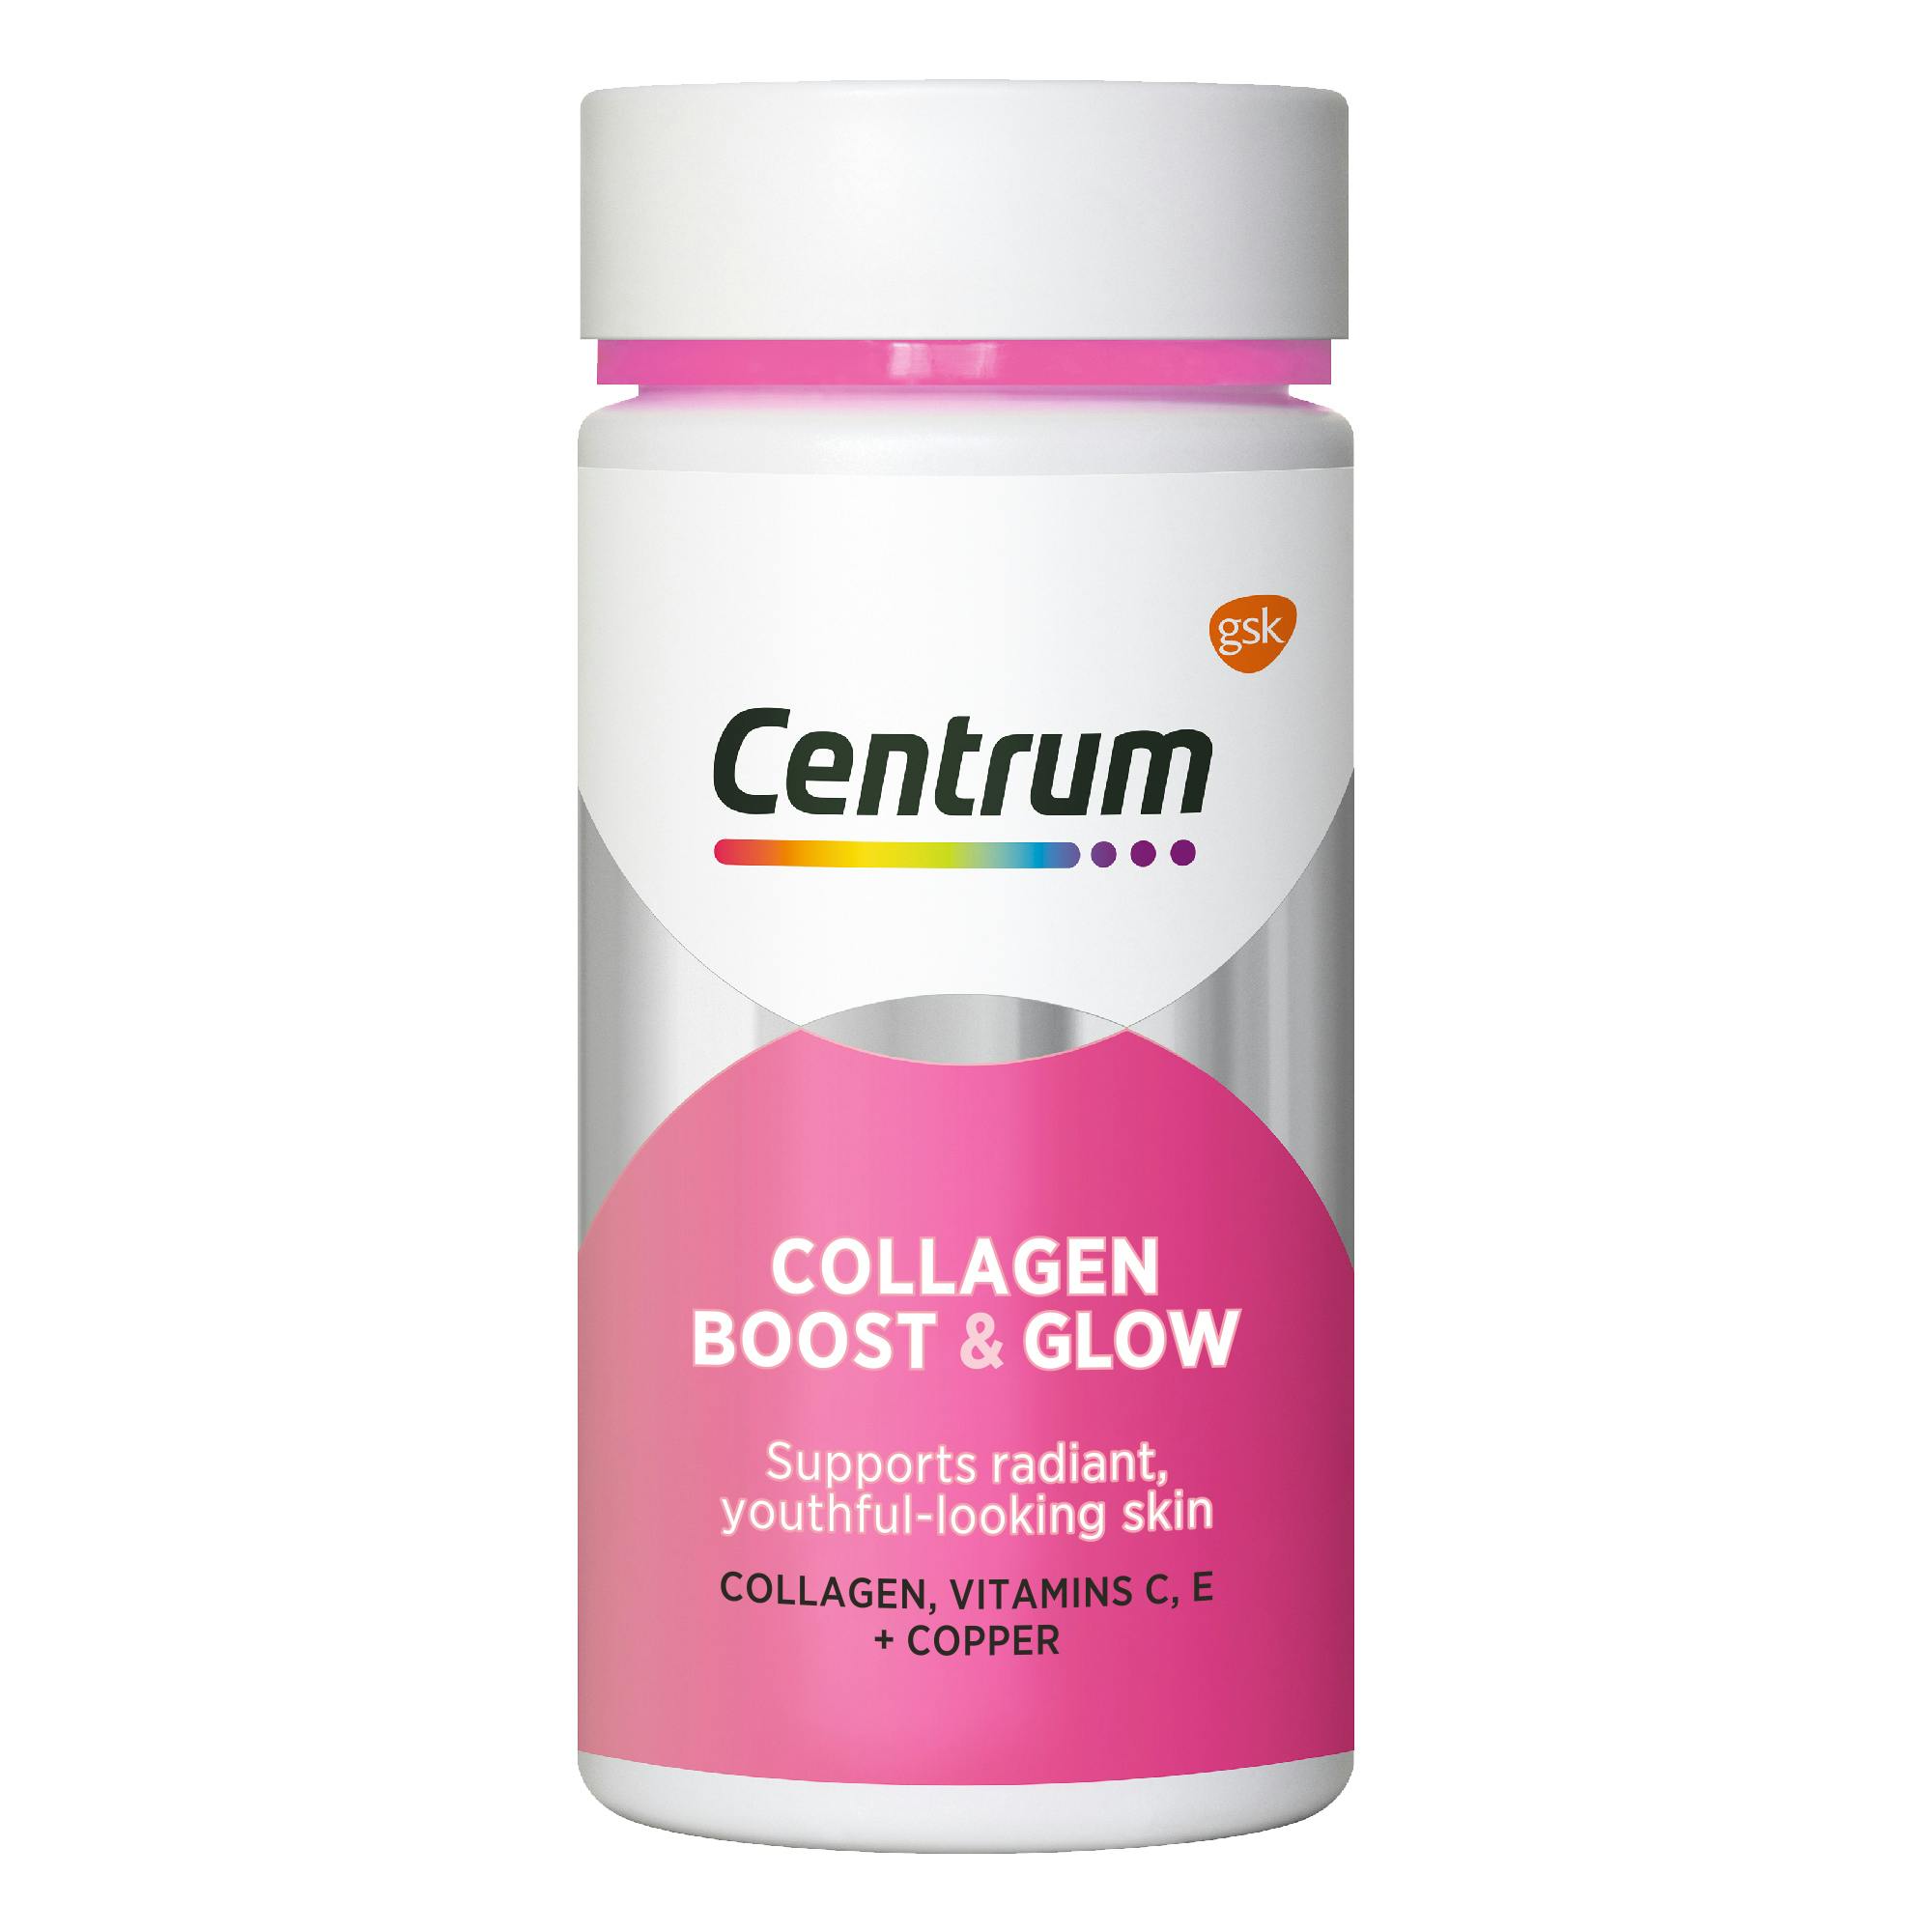 Bottle of Collagen Boost & Glow from the Centrum Benefits Blend (50 tablets).